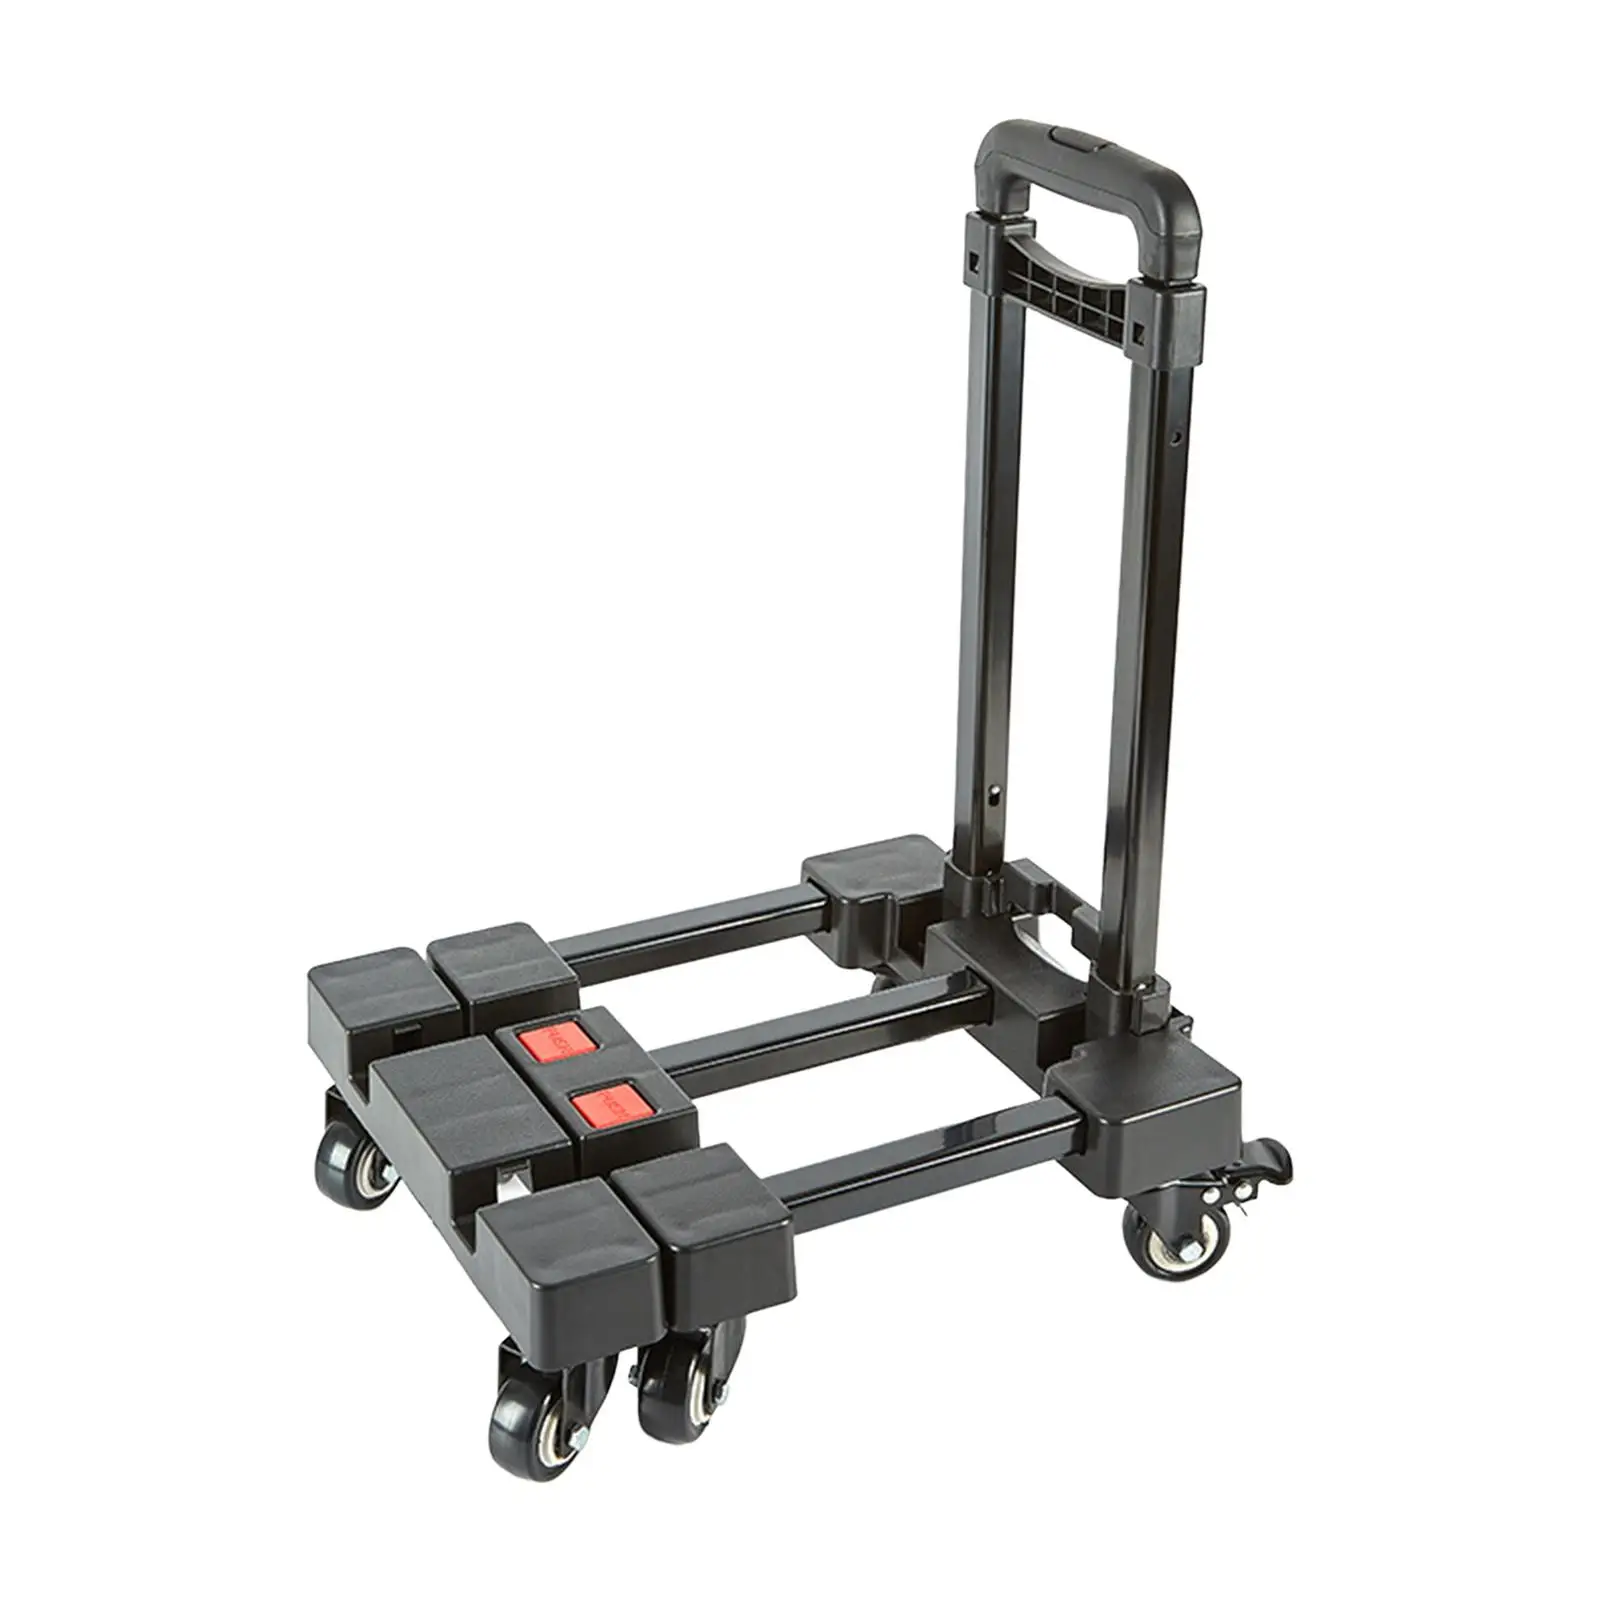 Folding Hand Truck Portable Sturdy Moving Luggages Cart for Moving Delivery Transportation 100kg (220lb) Load Capacity